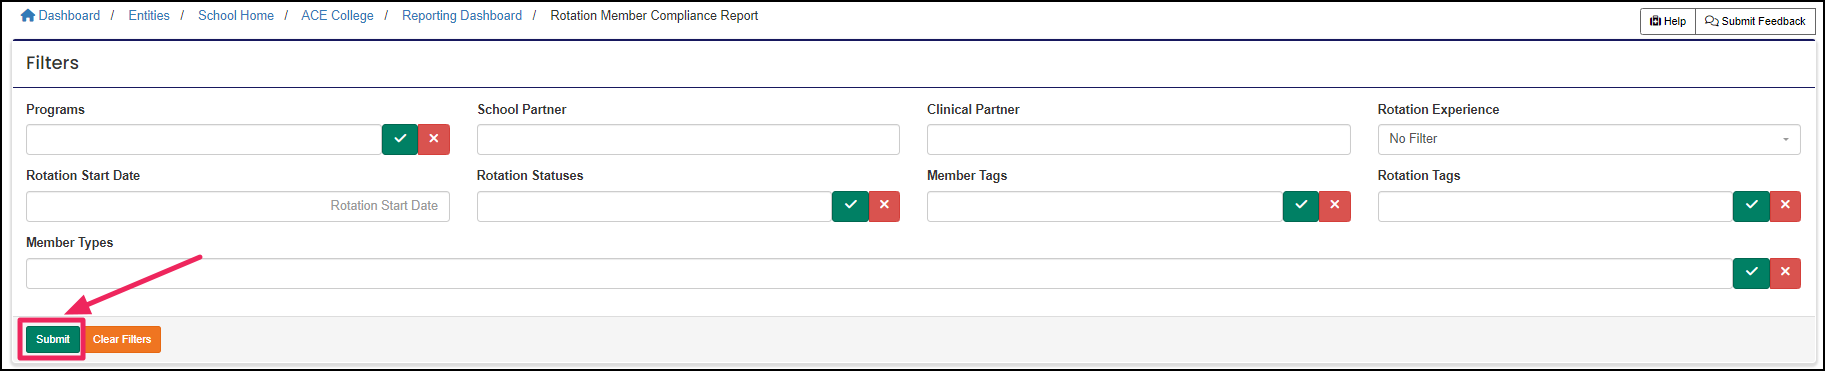 Image shows filters and submit button for rotation member compliance report.